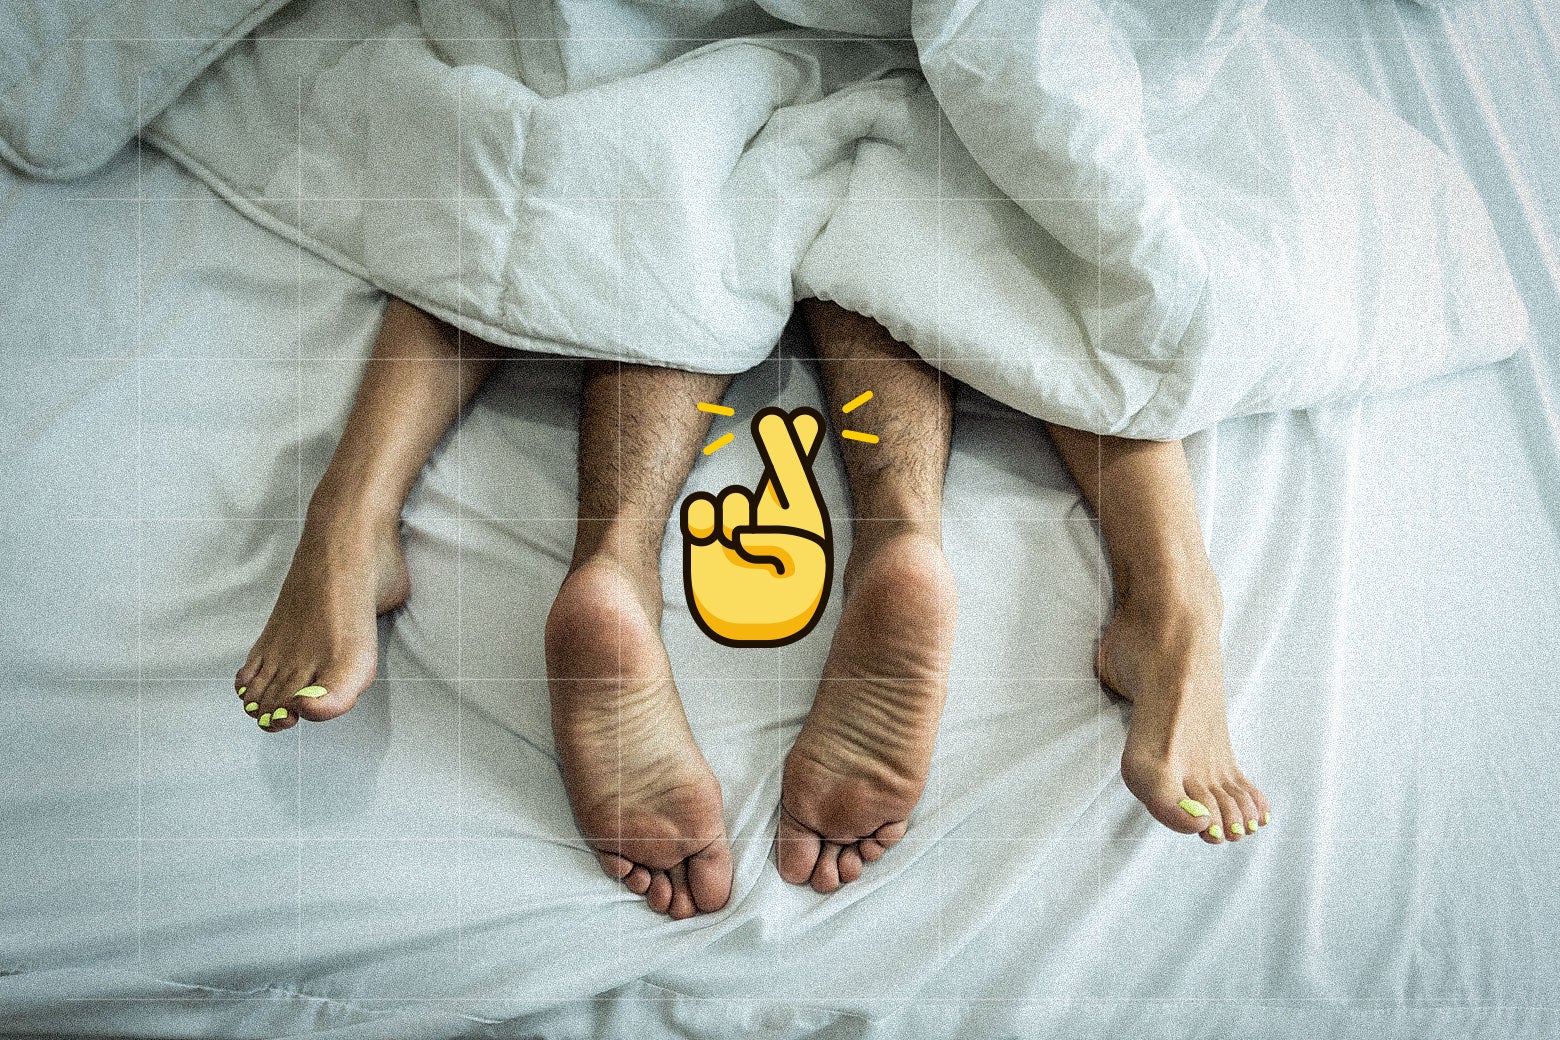 On a bed and under sheets, the feet of a couple who are having sex. On top of this image is the crossed-fingers emoji.